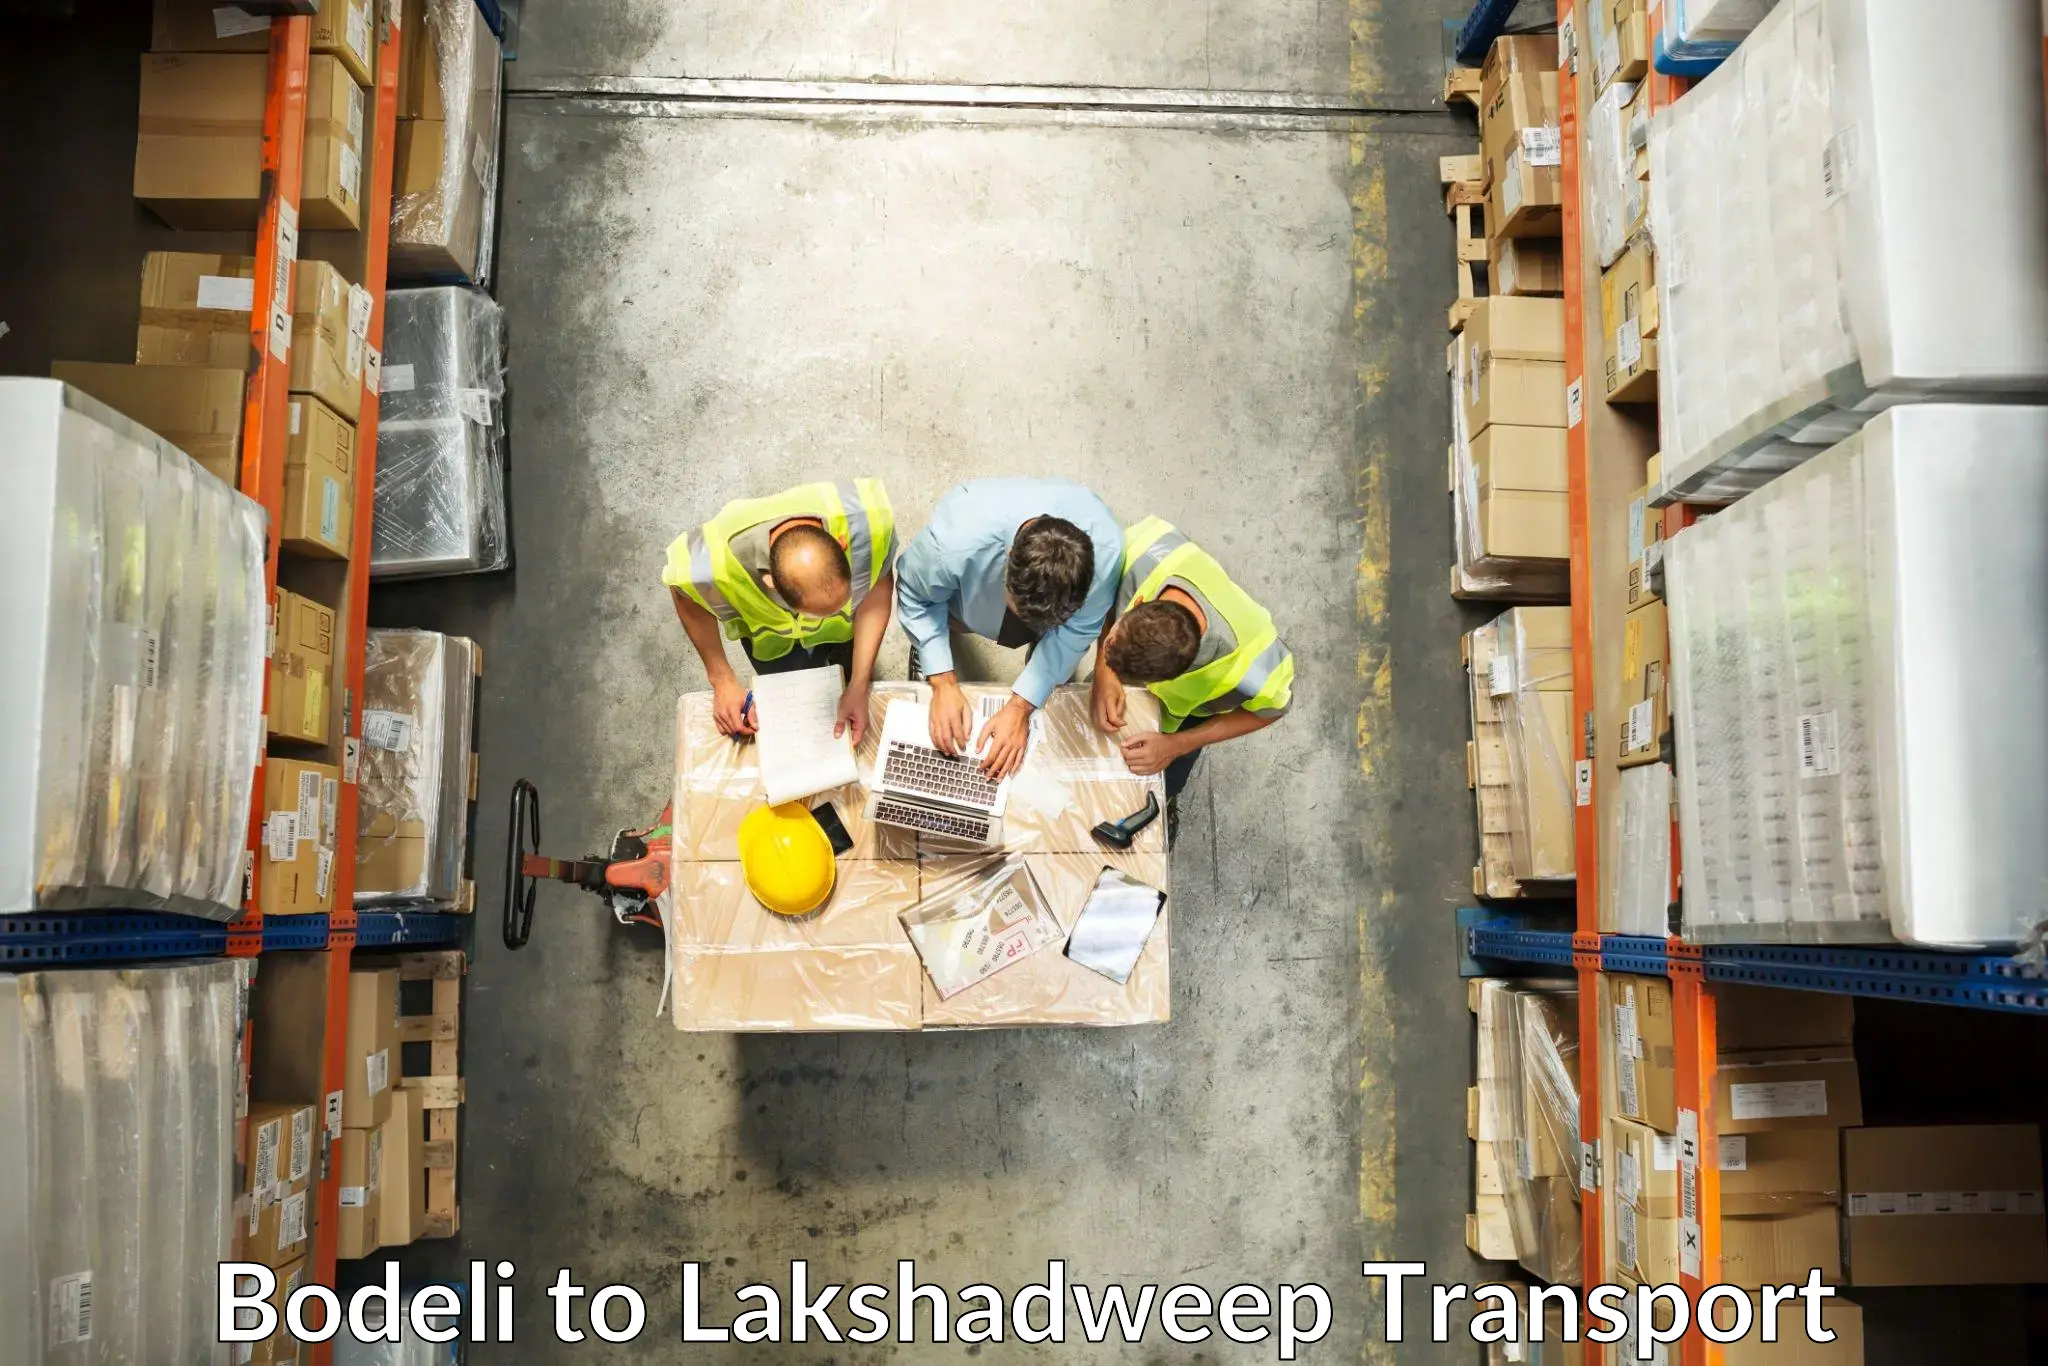 Air freight transport services Bodeli to Lakshadweep